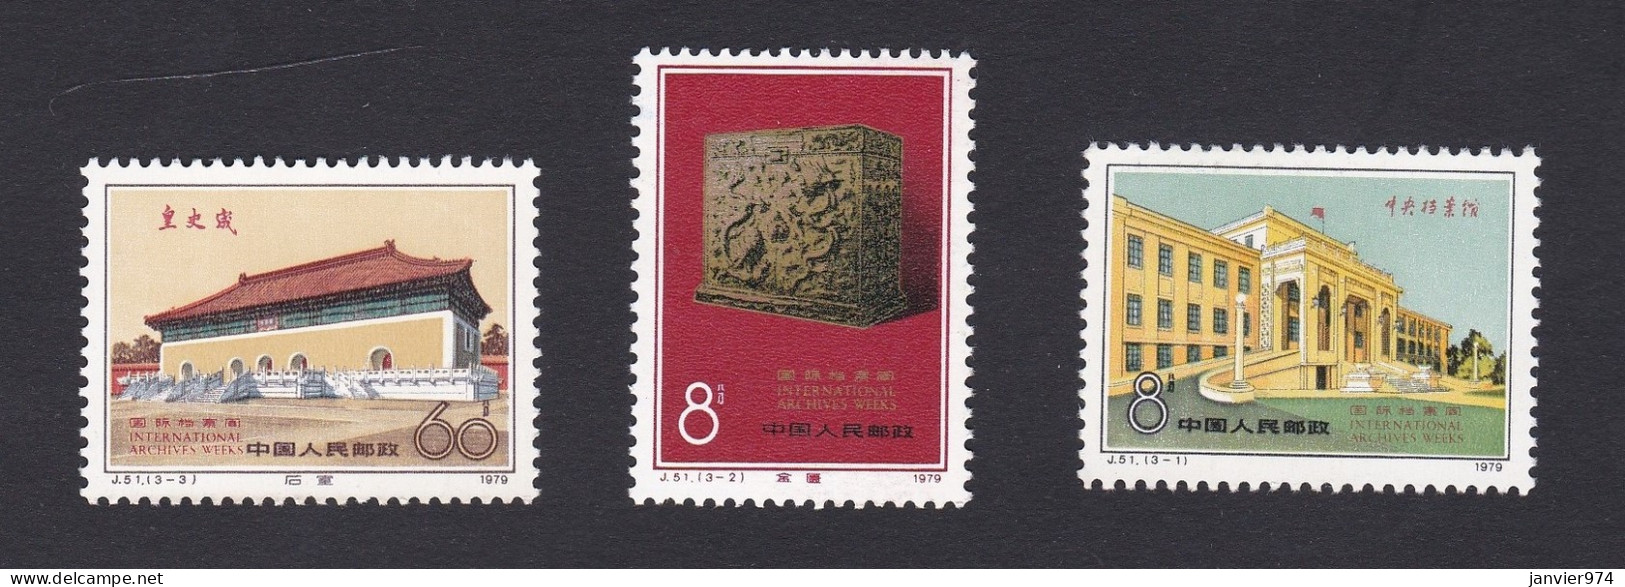 Chine 1979. Semaines Internationales Des Archives, La Serie Complète , 3 Timbres Neufs , Scan Recto Verso . - Unused Stamps